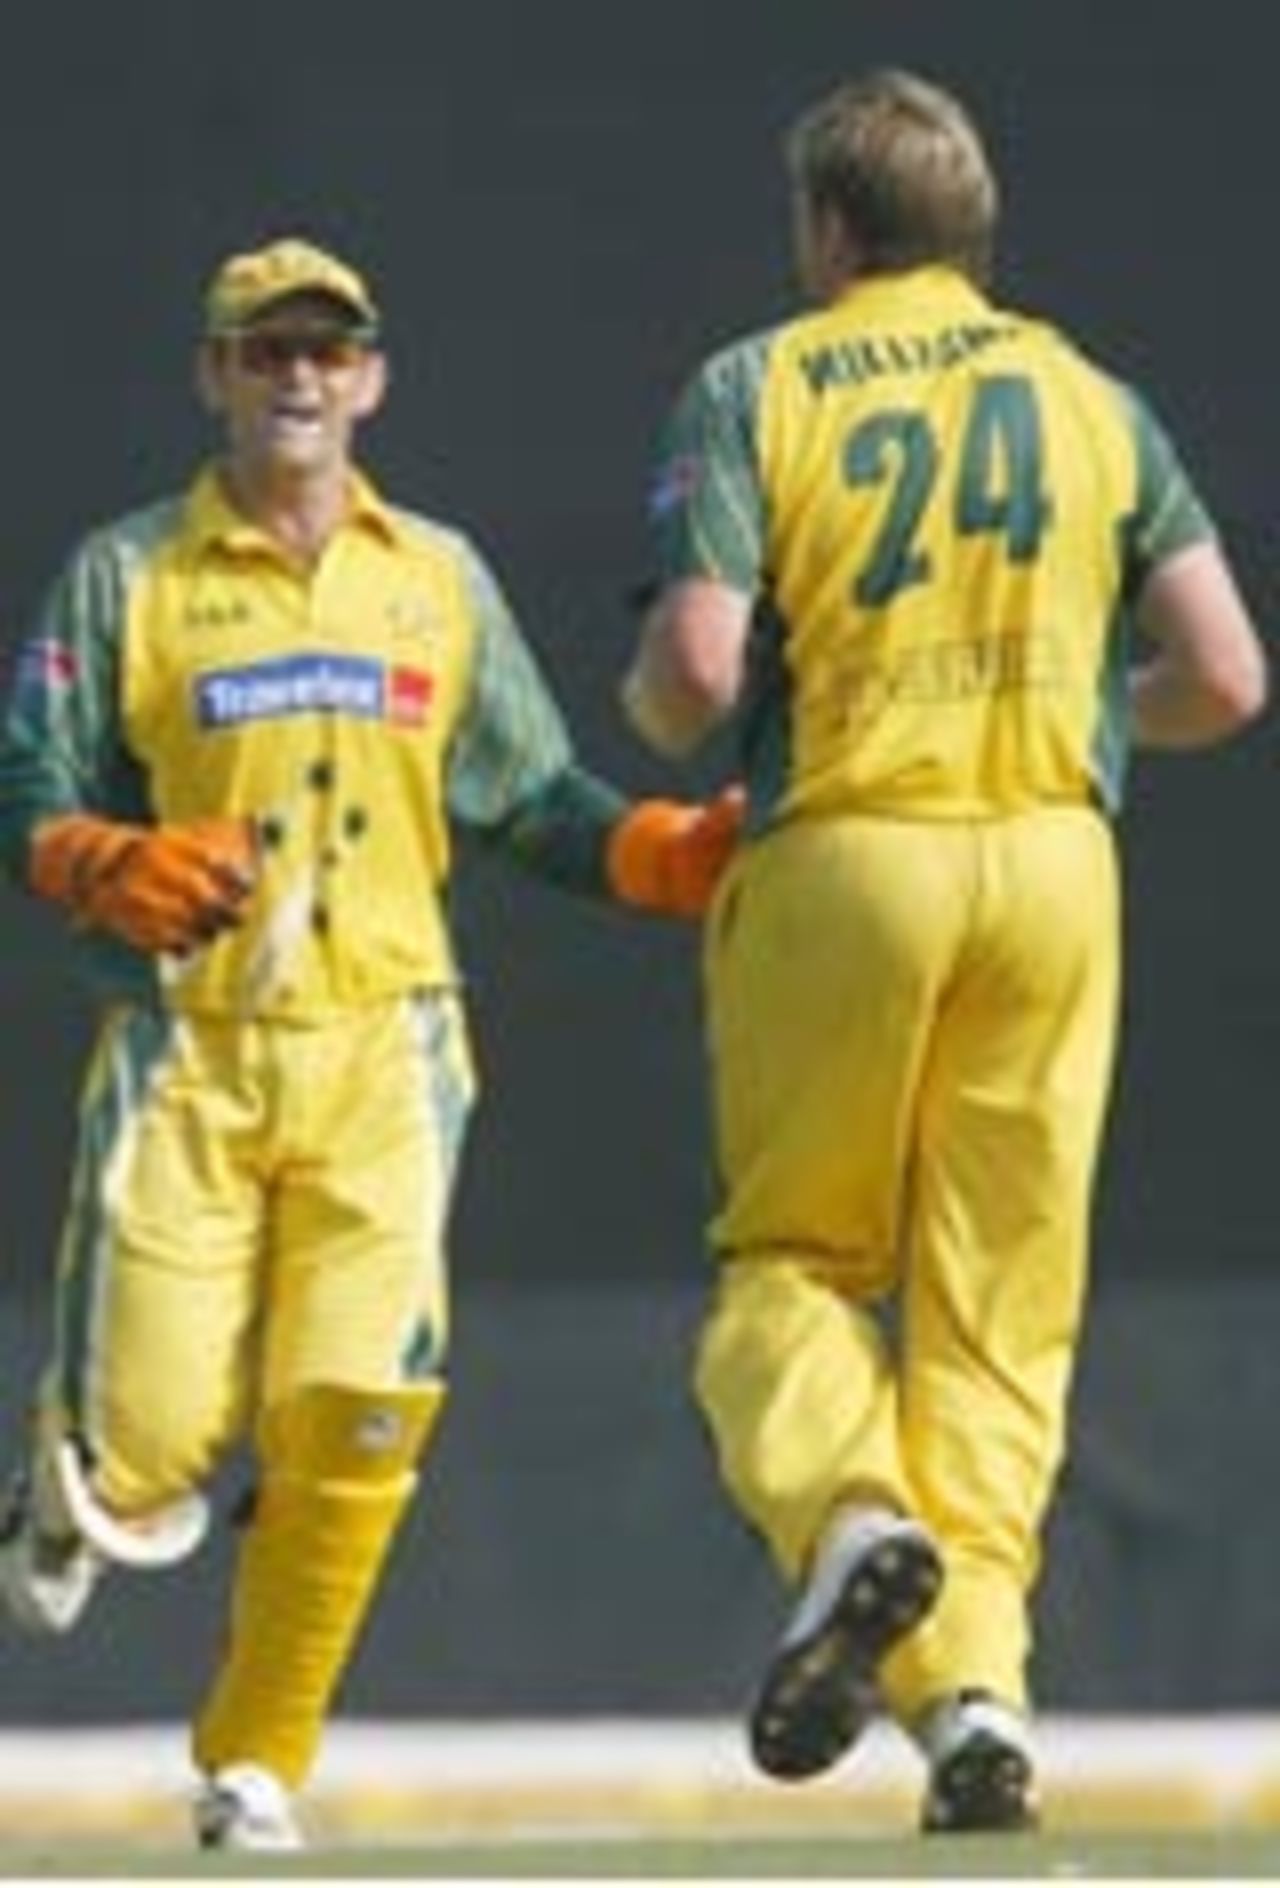 Brad Williams and Adam Gilchrist celebrate the fall of a wicket, Australia v New Zealand, 5th ODI, TVS Cup, Pune, 3rd November, 2003